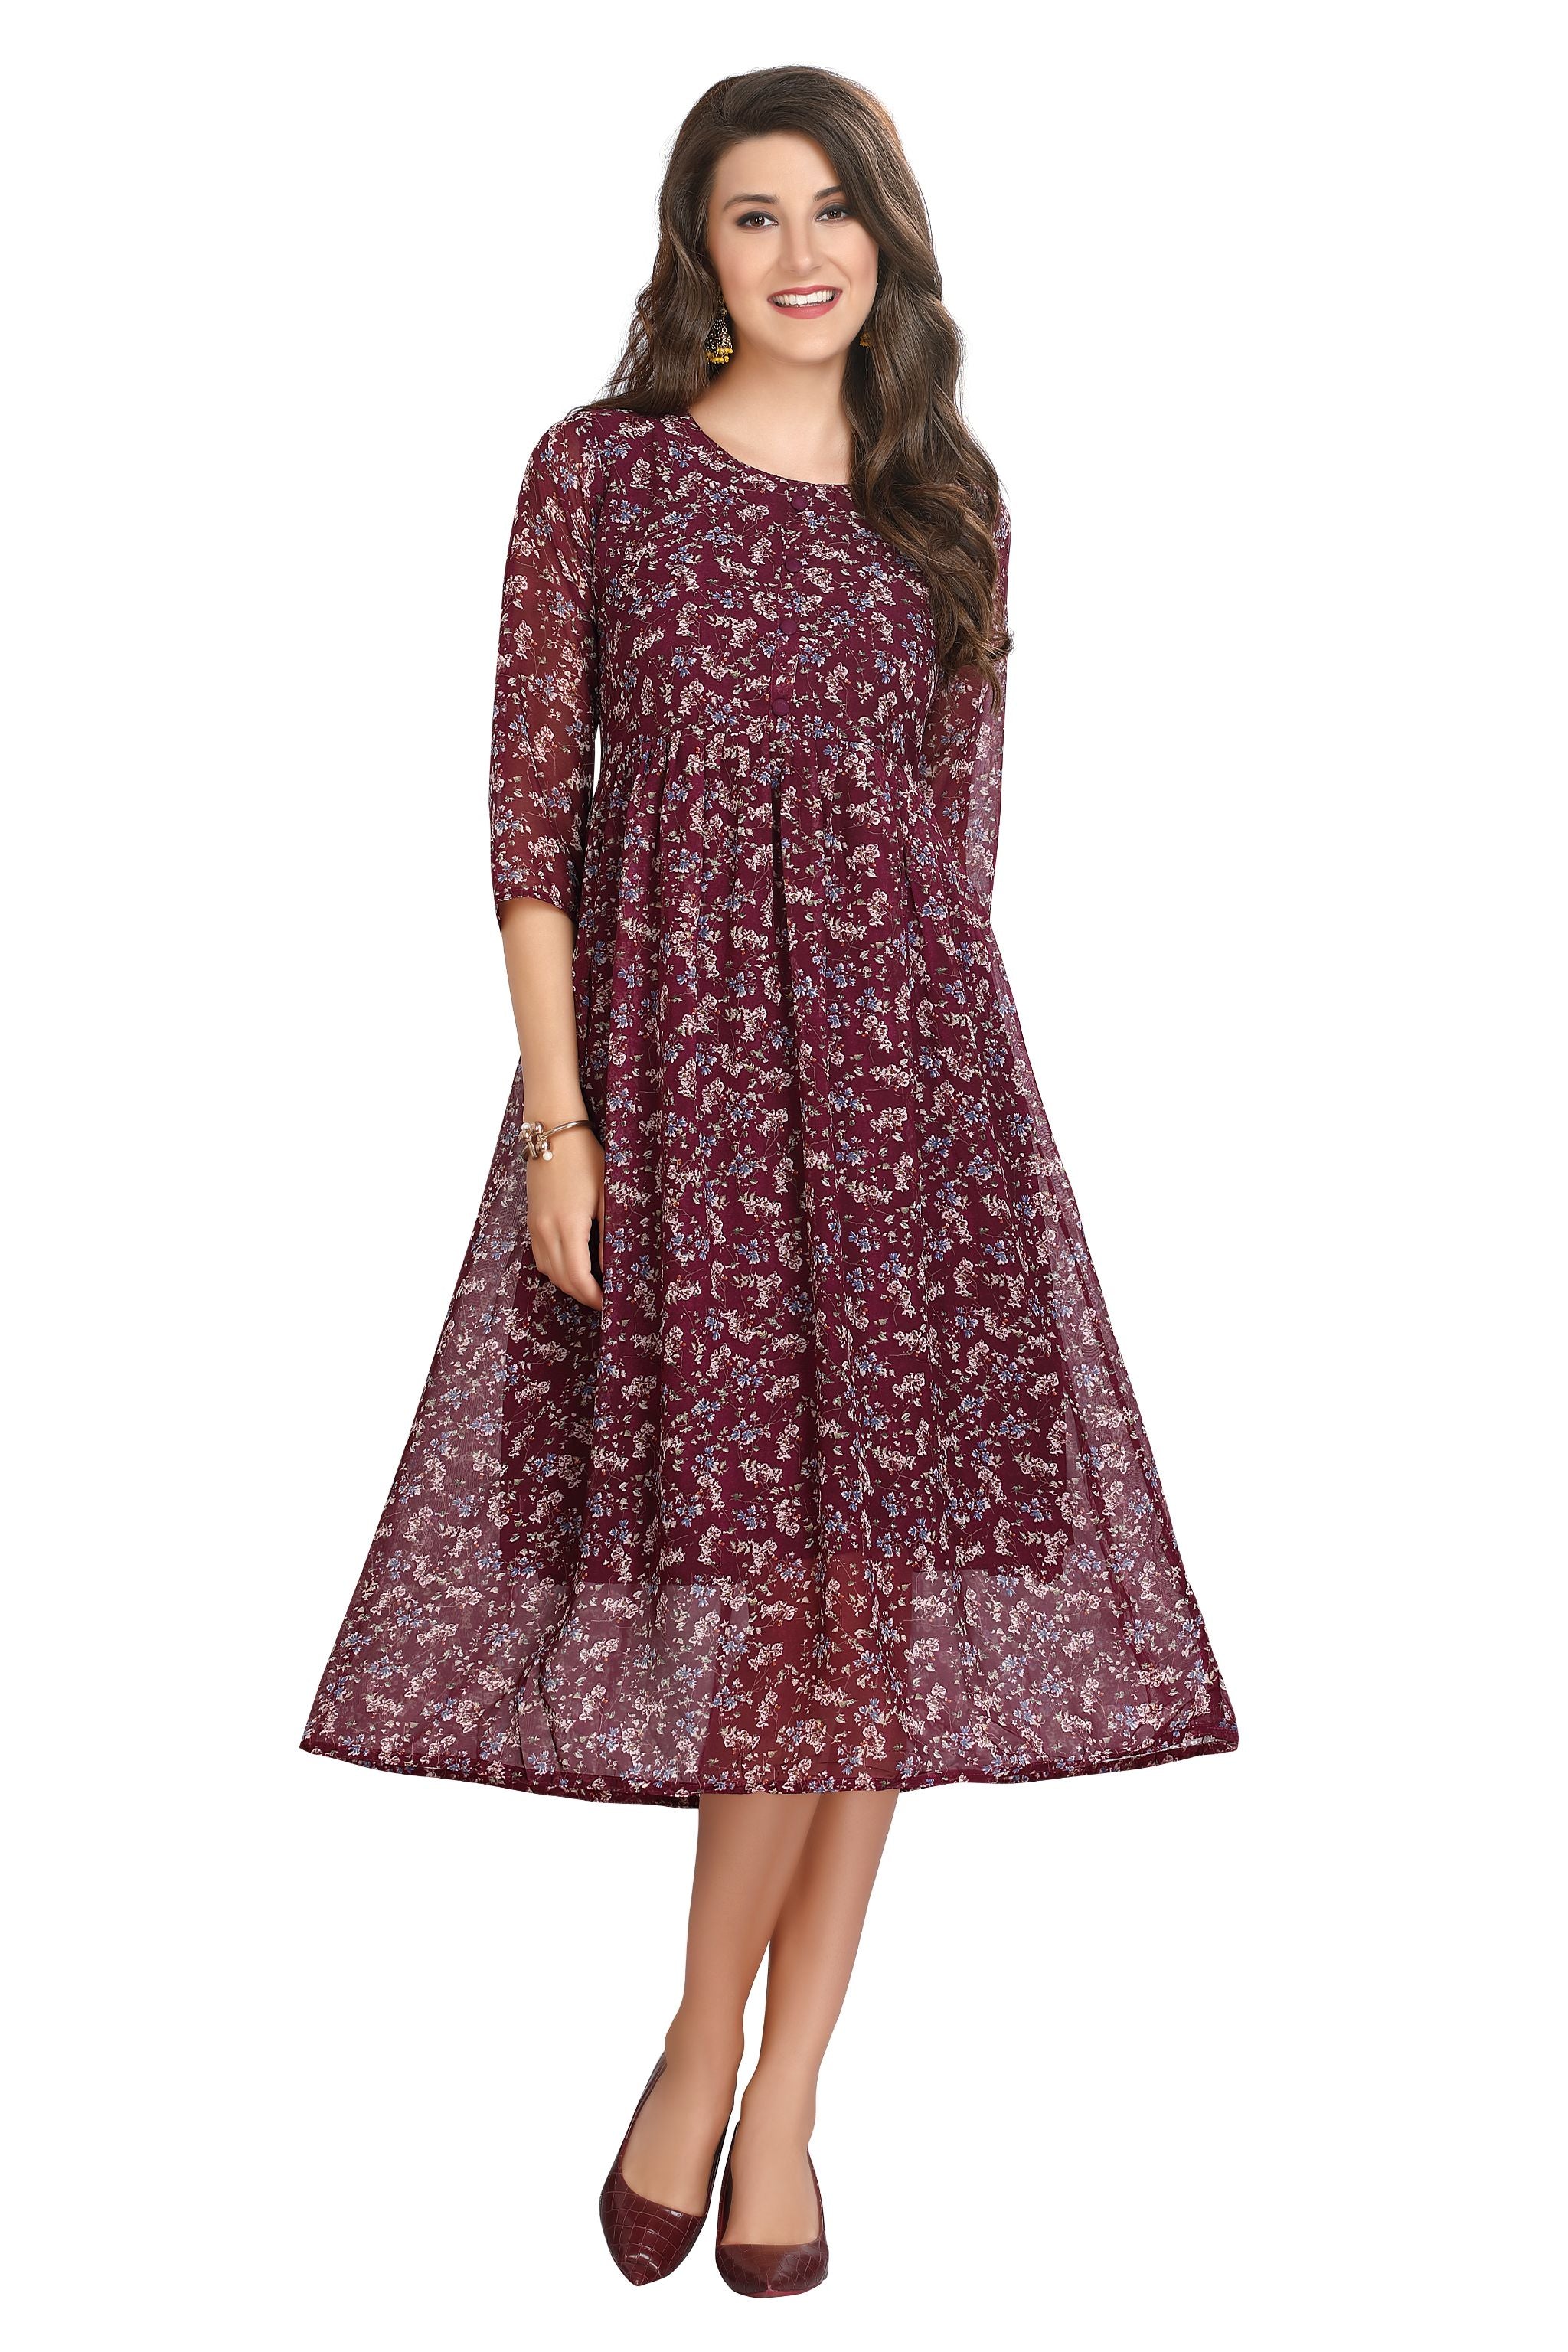 Buy New Collection Cotton Frock Style Kurti at Rs.450/Piece in surat offer  by A P Enterprise